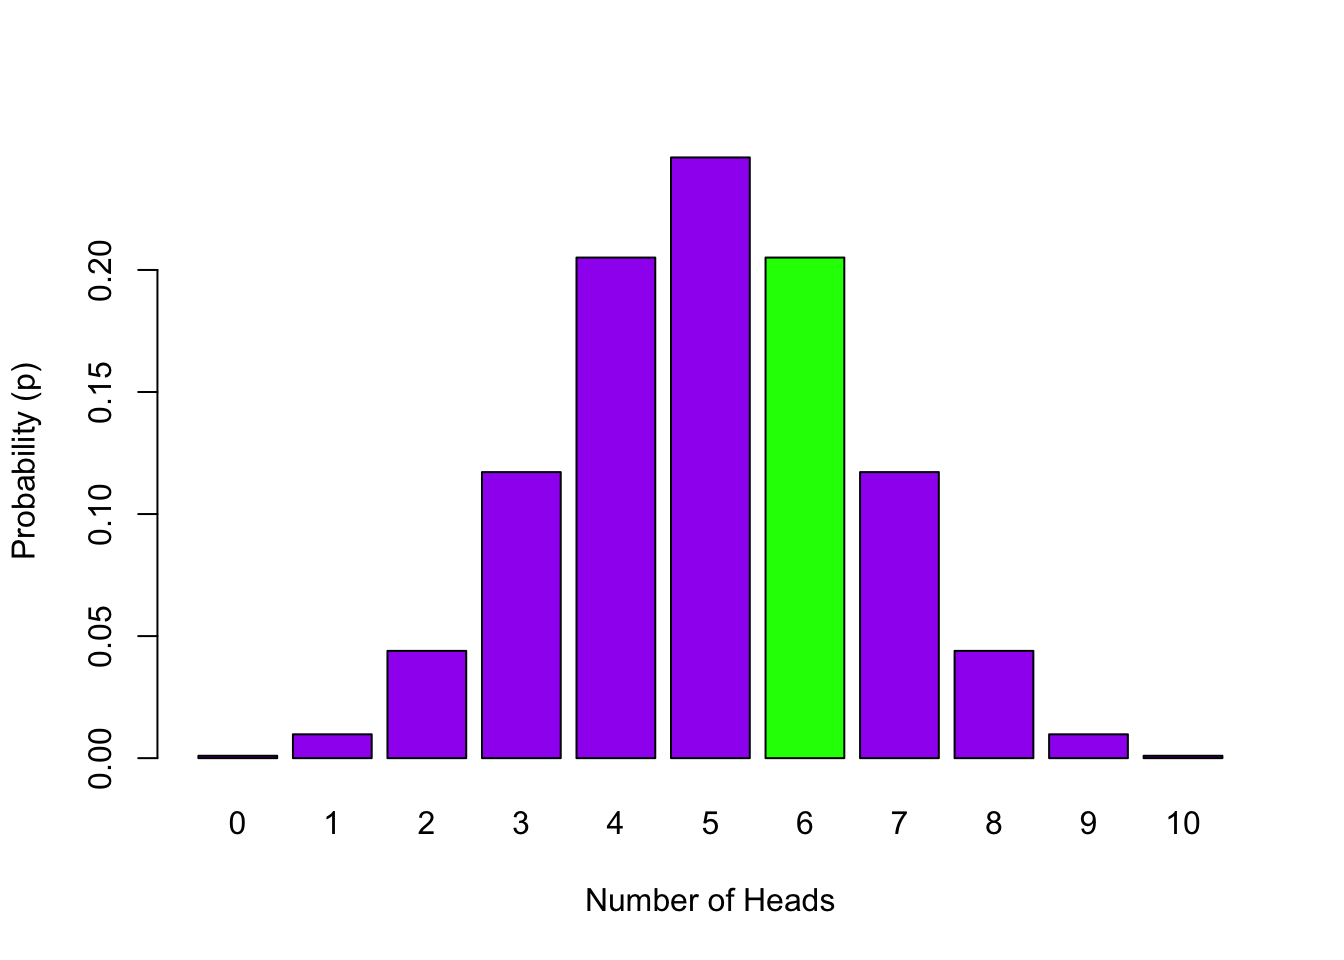 Probability Distribution of Number of Heads in 10 Flips with the probability of 6 out of 10 Heads highlighted in green